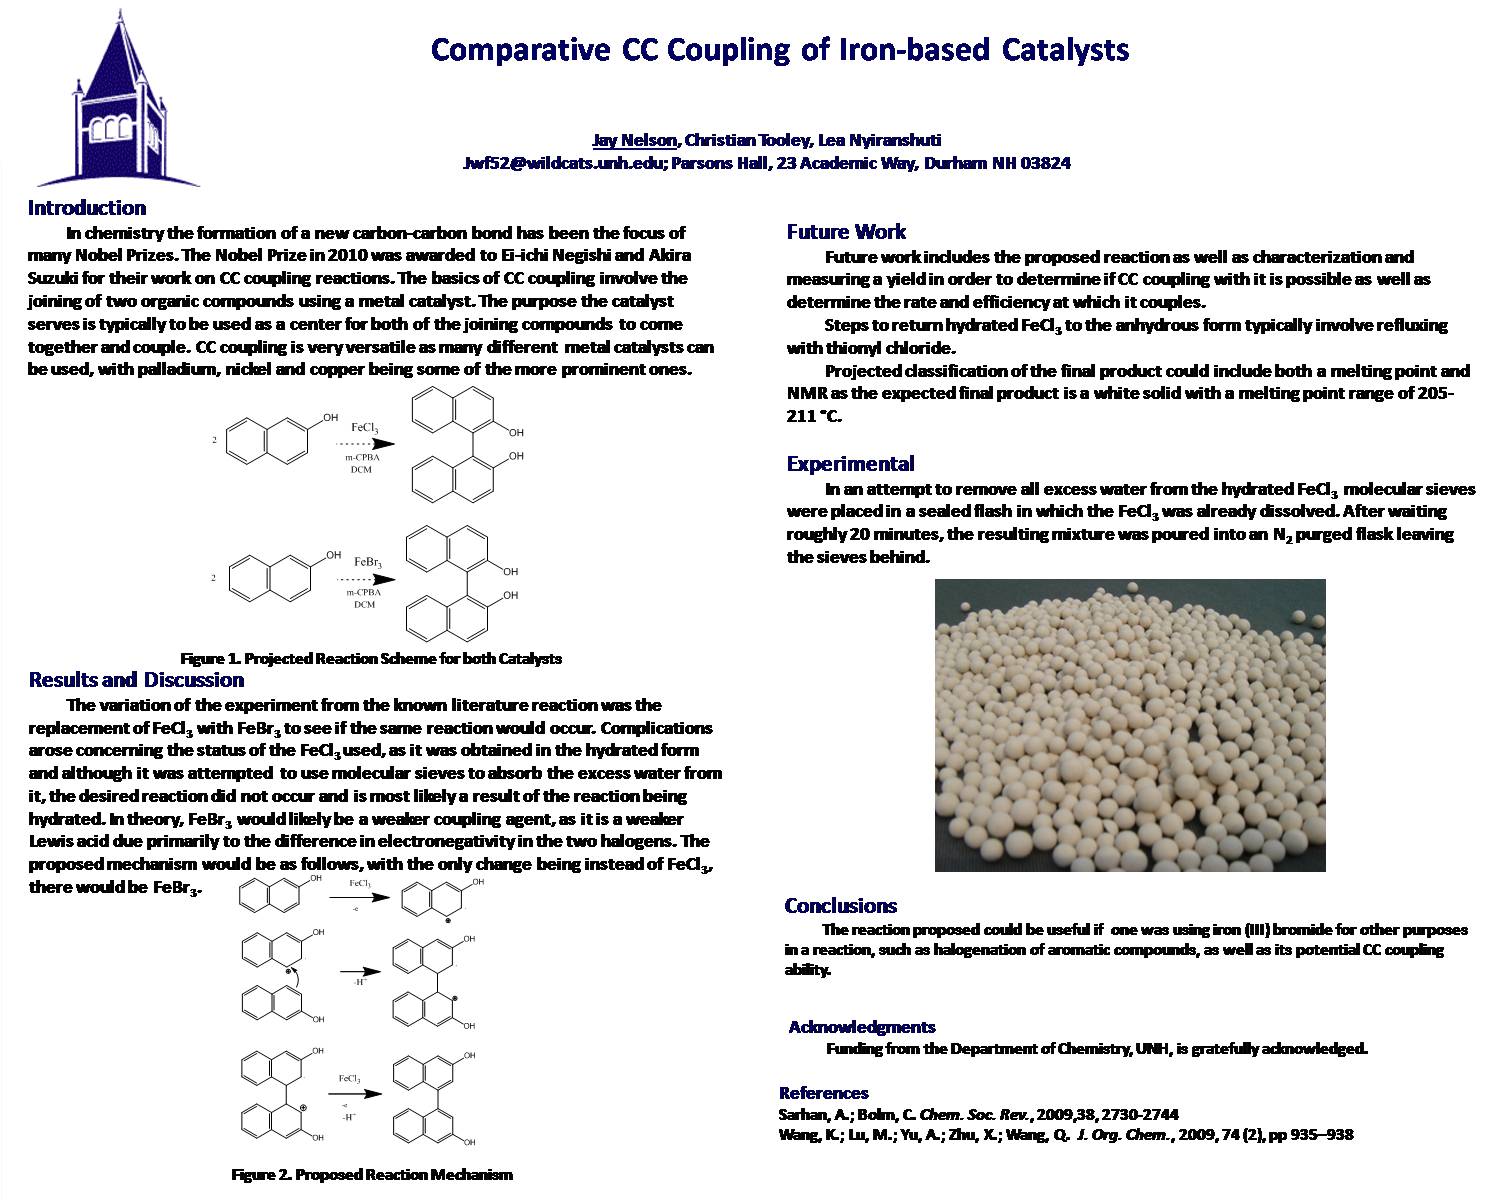 Comparative Cc Coupling Of Iron-Based Catalysts by Jwf52